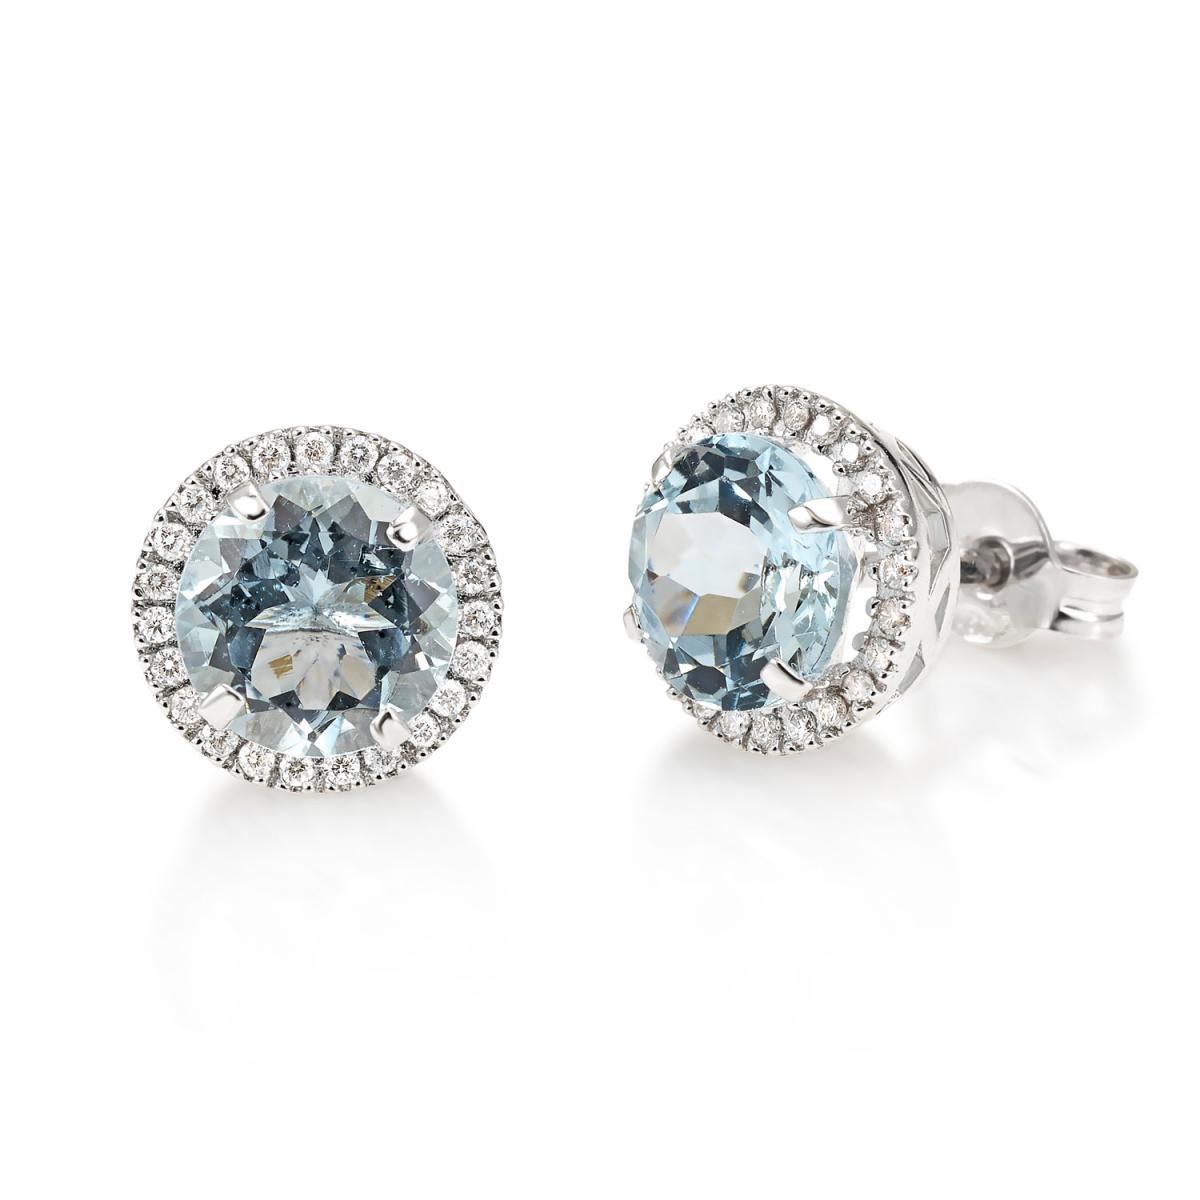 18 kt white gold earrings, with aquamarine and diamonds - OD195-LB